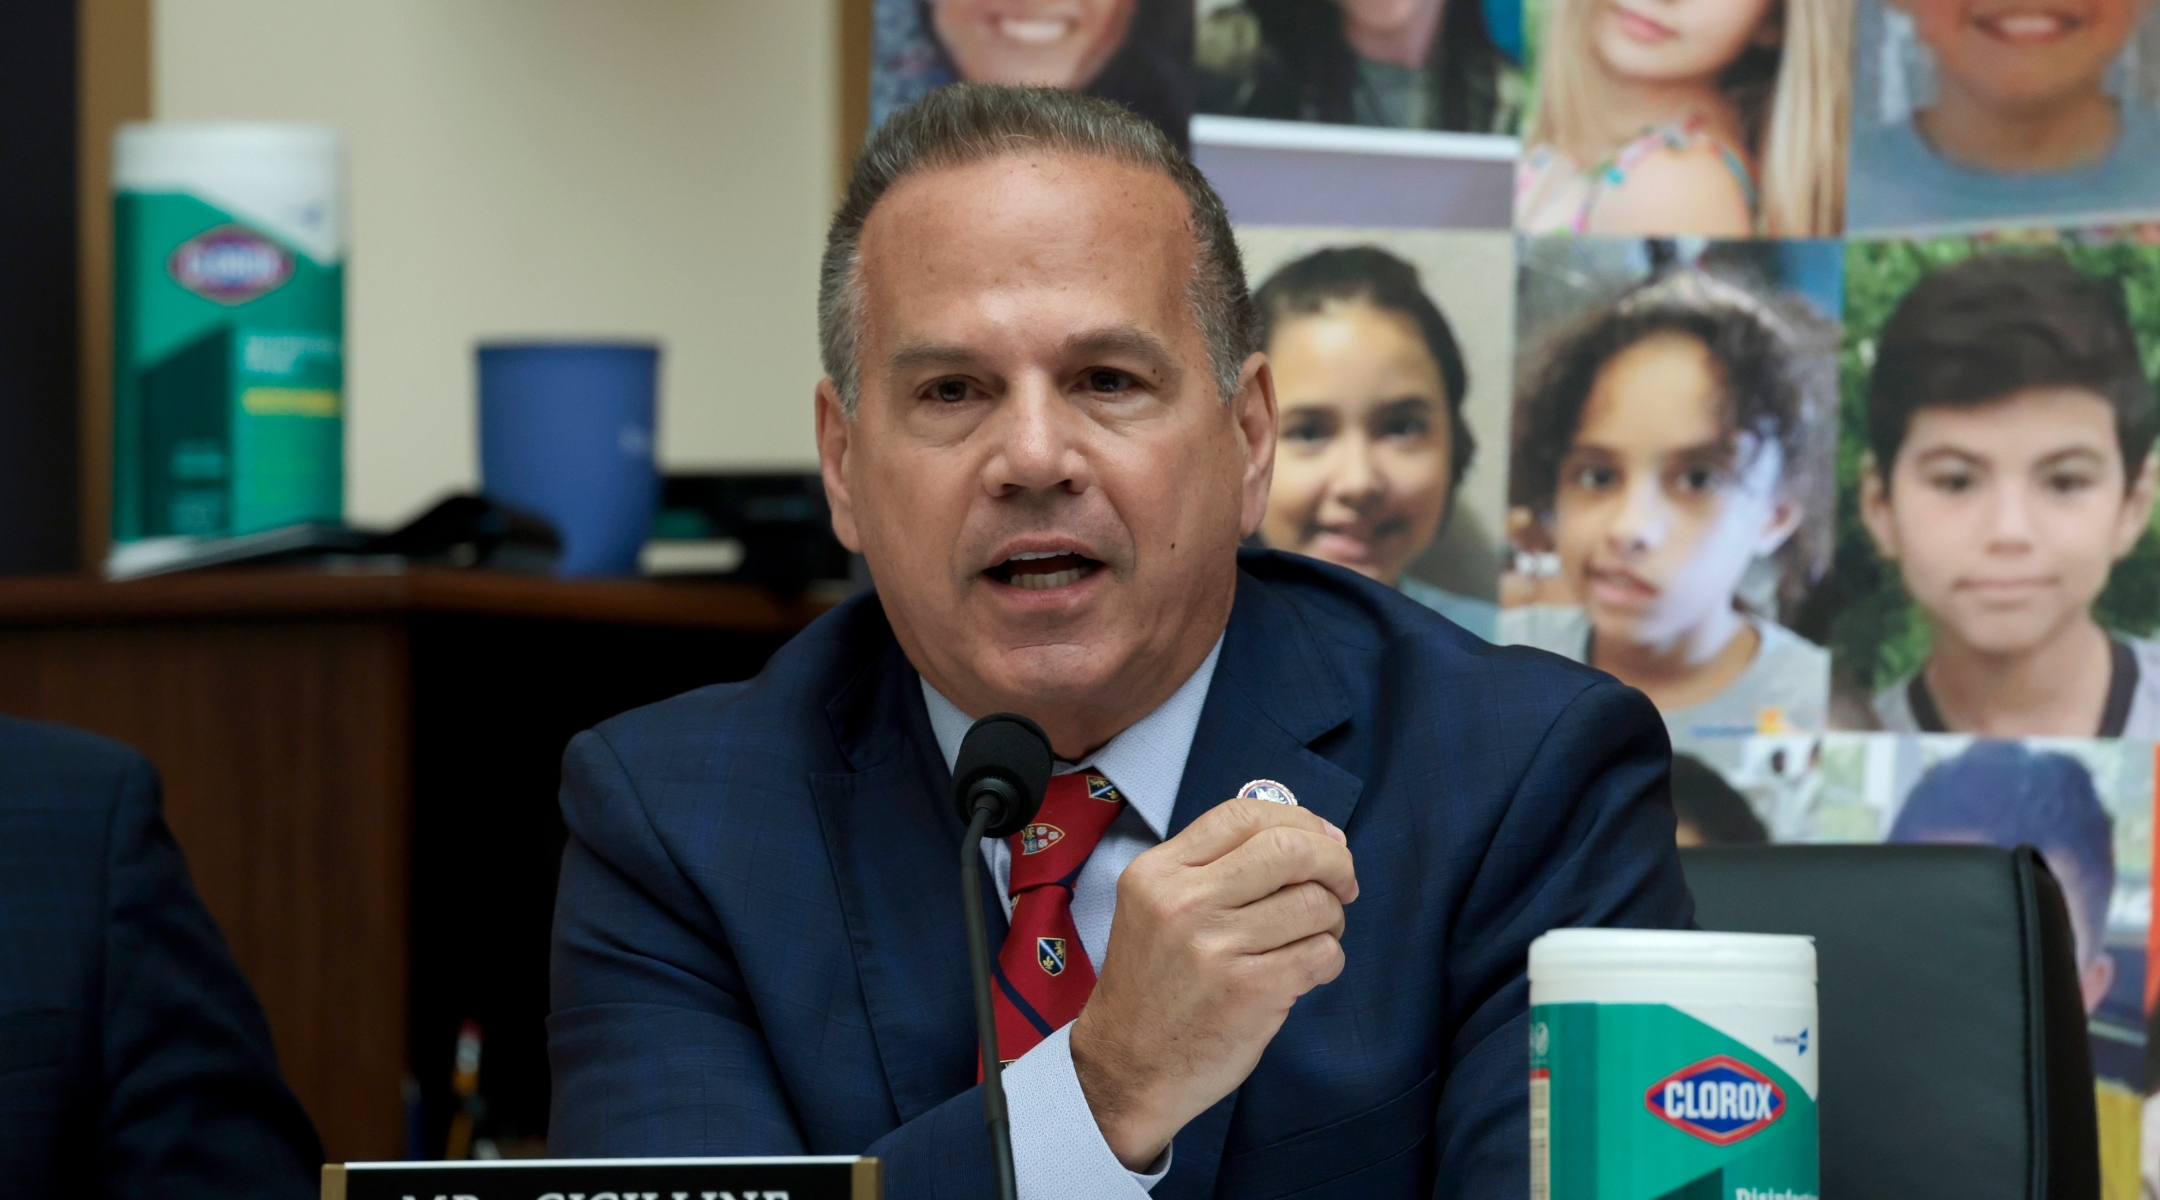 Rep. David N. Cicilline, a Rhode Island Democrat, speaks during a House Judiciary Committee mark up hearing in the Rayburn House Office Building in Washington, DC, June 02, 2022. (Anna Moneymaker/Getty Images)